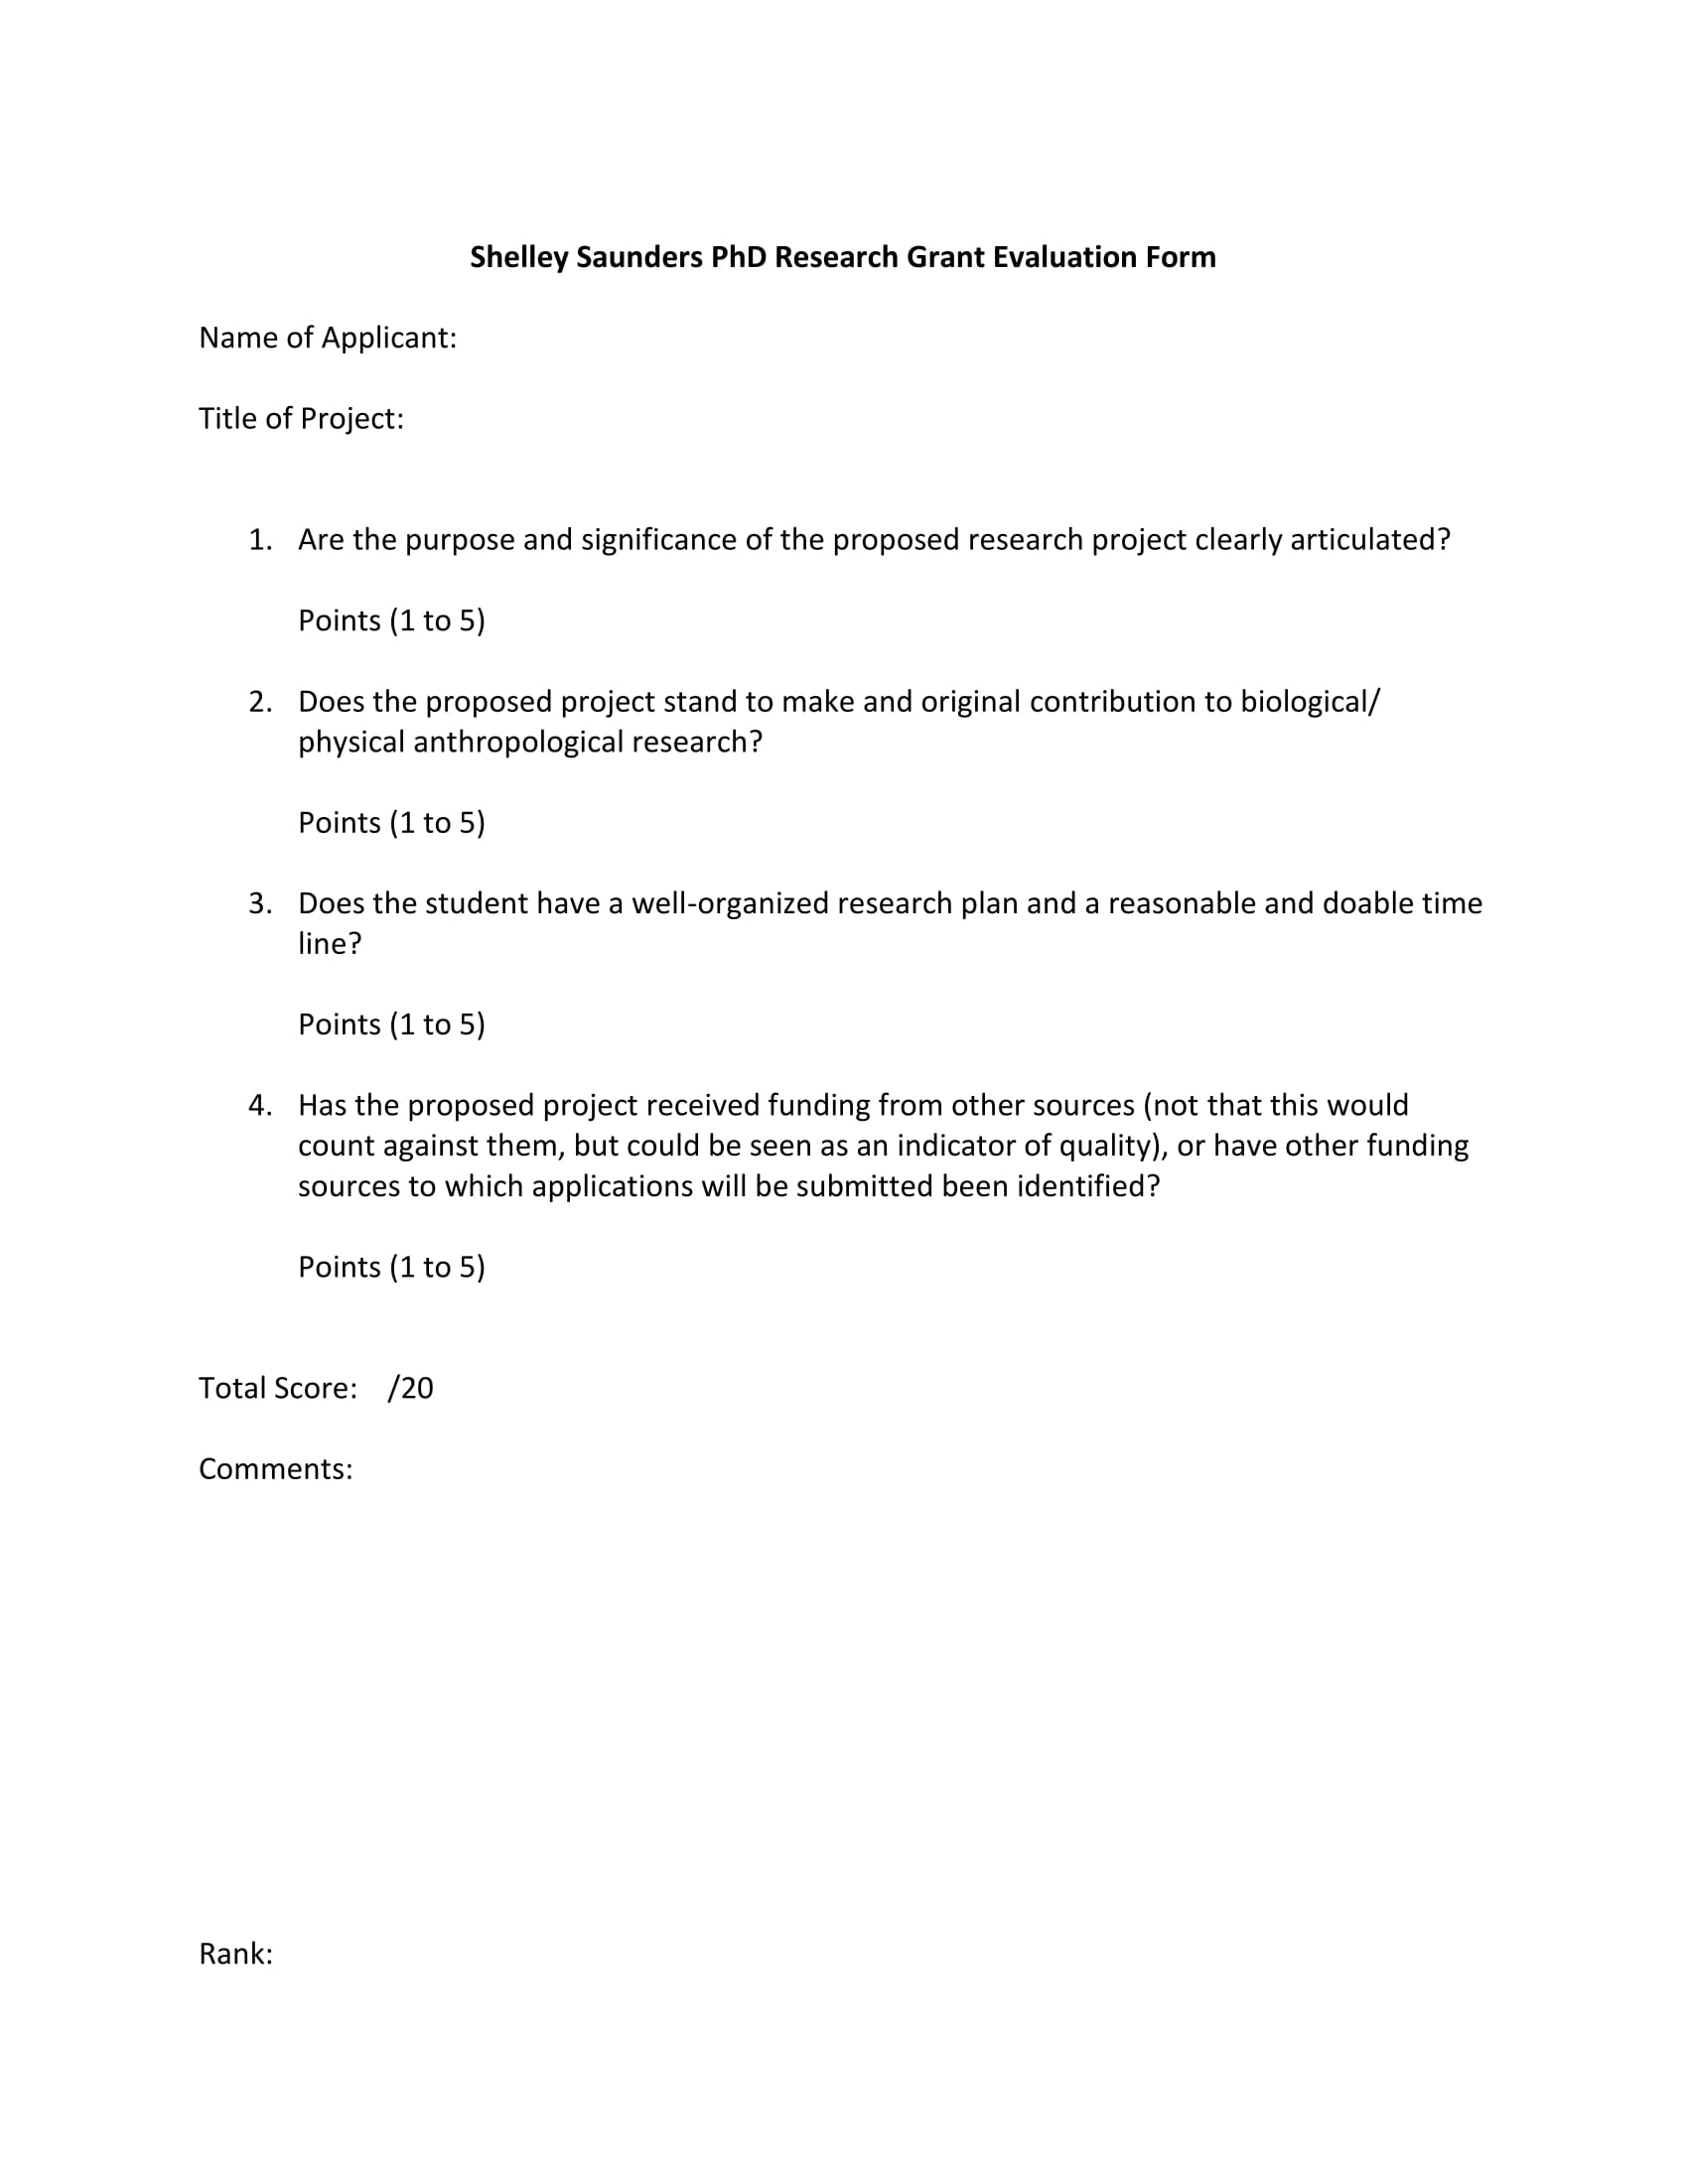 research grant evaluation form 1